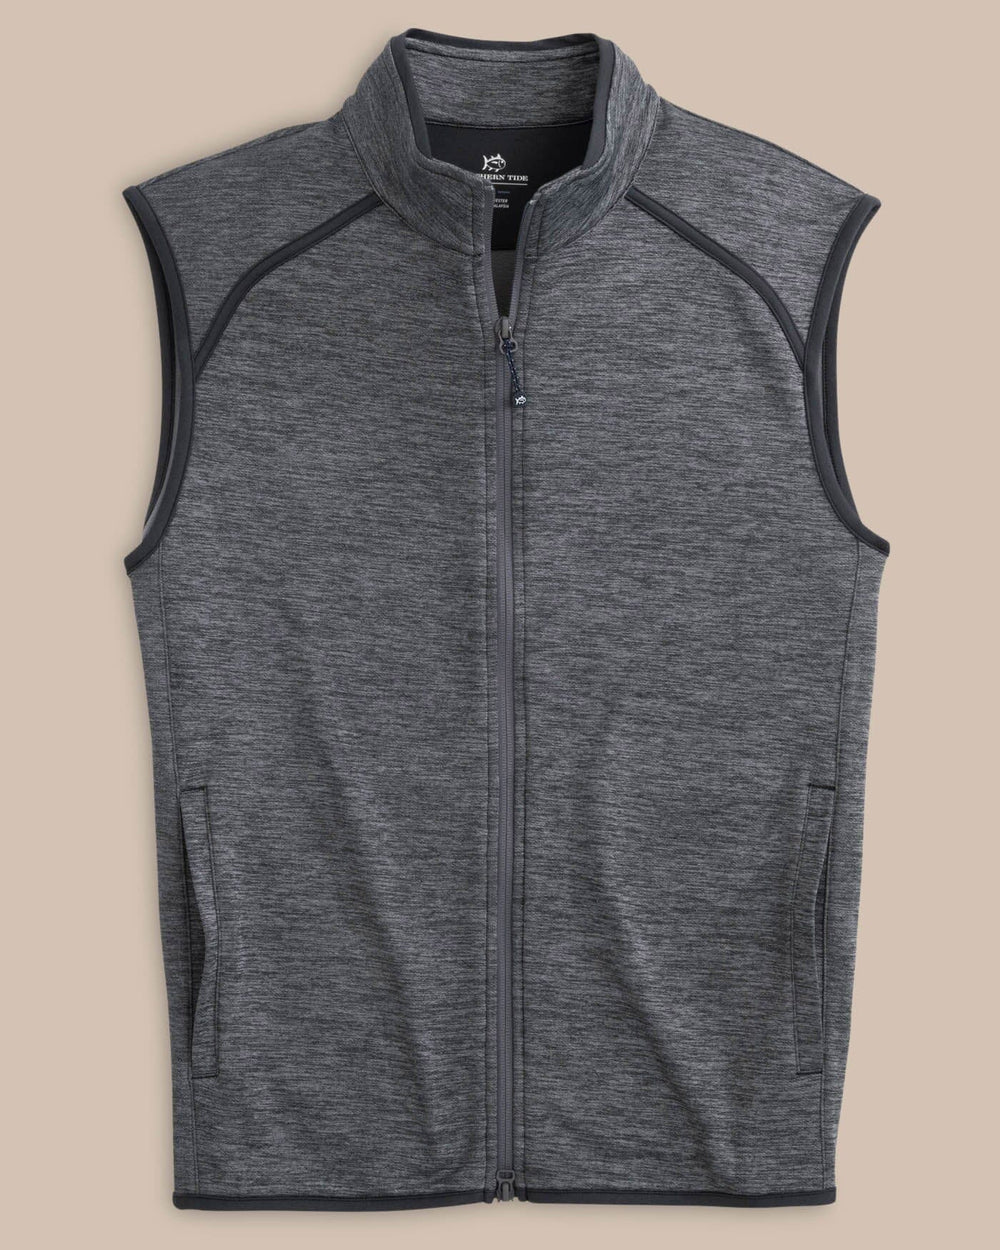 The front view of the Southern Tide Baybrook Heather Vest by Southern Tide - Heather Black